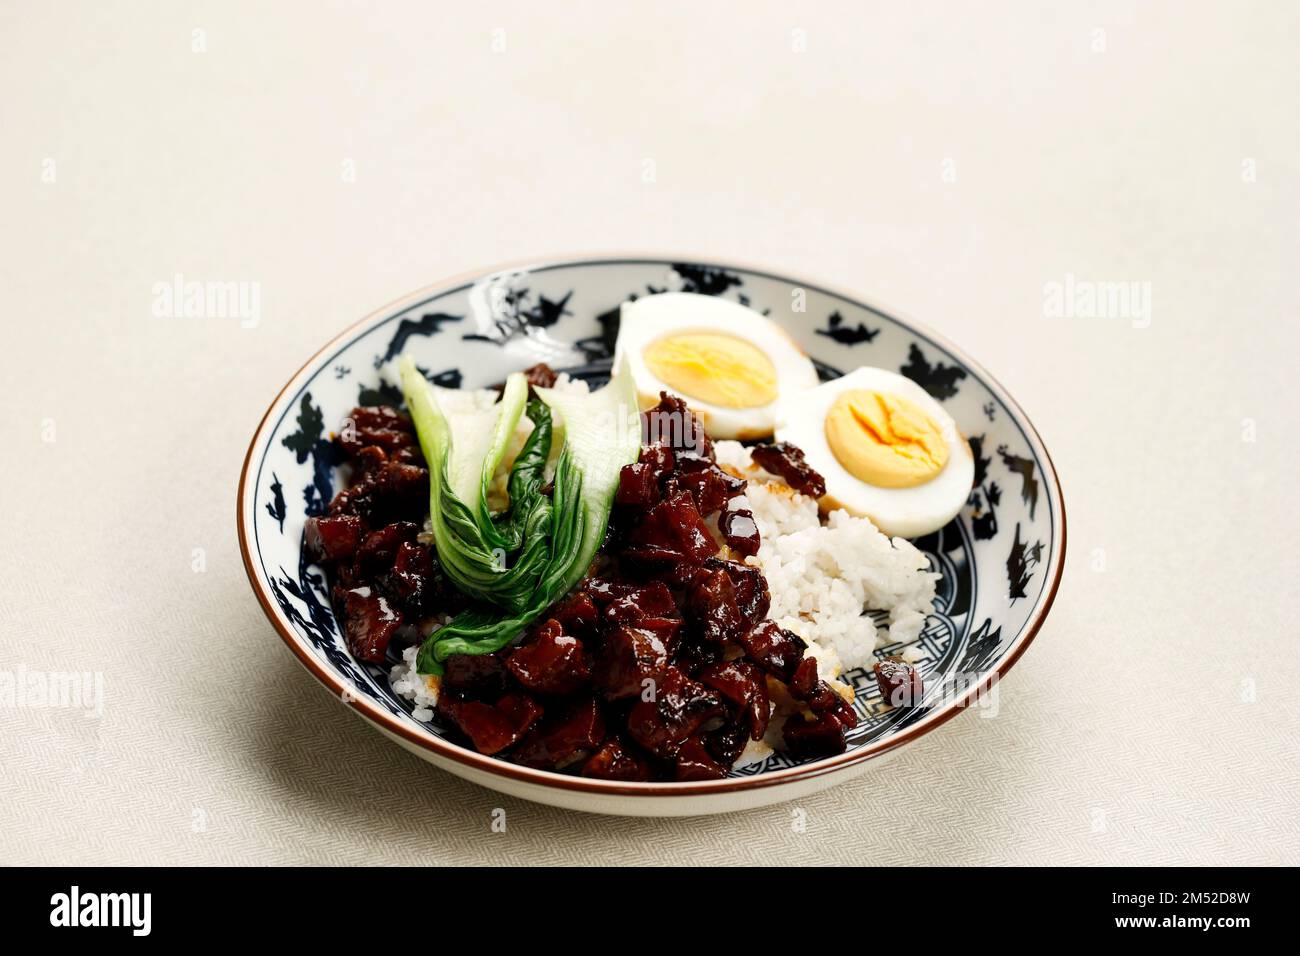 Taiwanese Food, Lu Rou Fan,  Braised Pork Meat on Steamed Rice with Boiled Egg and Pak Choy. Copy Space for Text Stock Photo